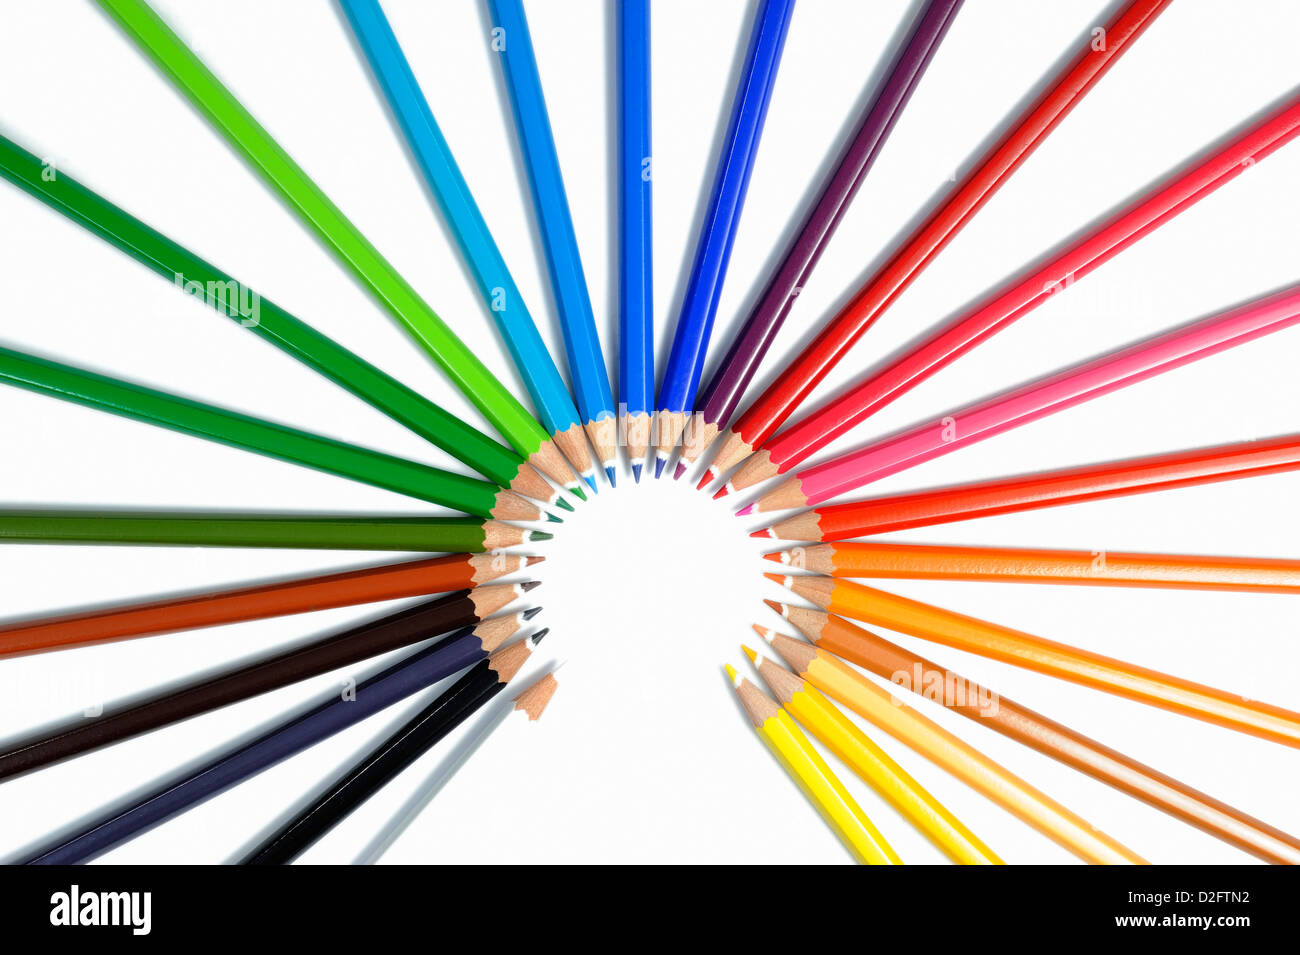 Colorful crayons in circle, on white background, studio shot Stock Photo